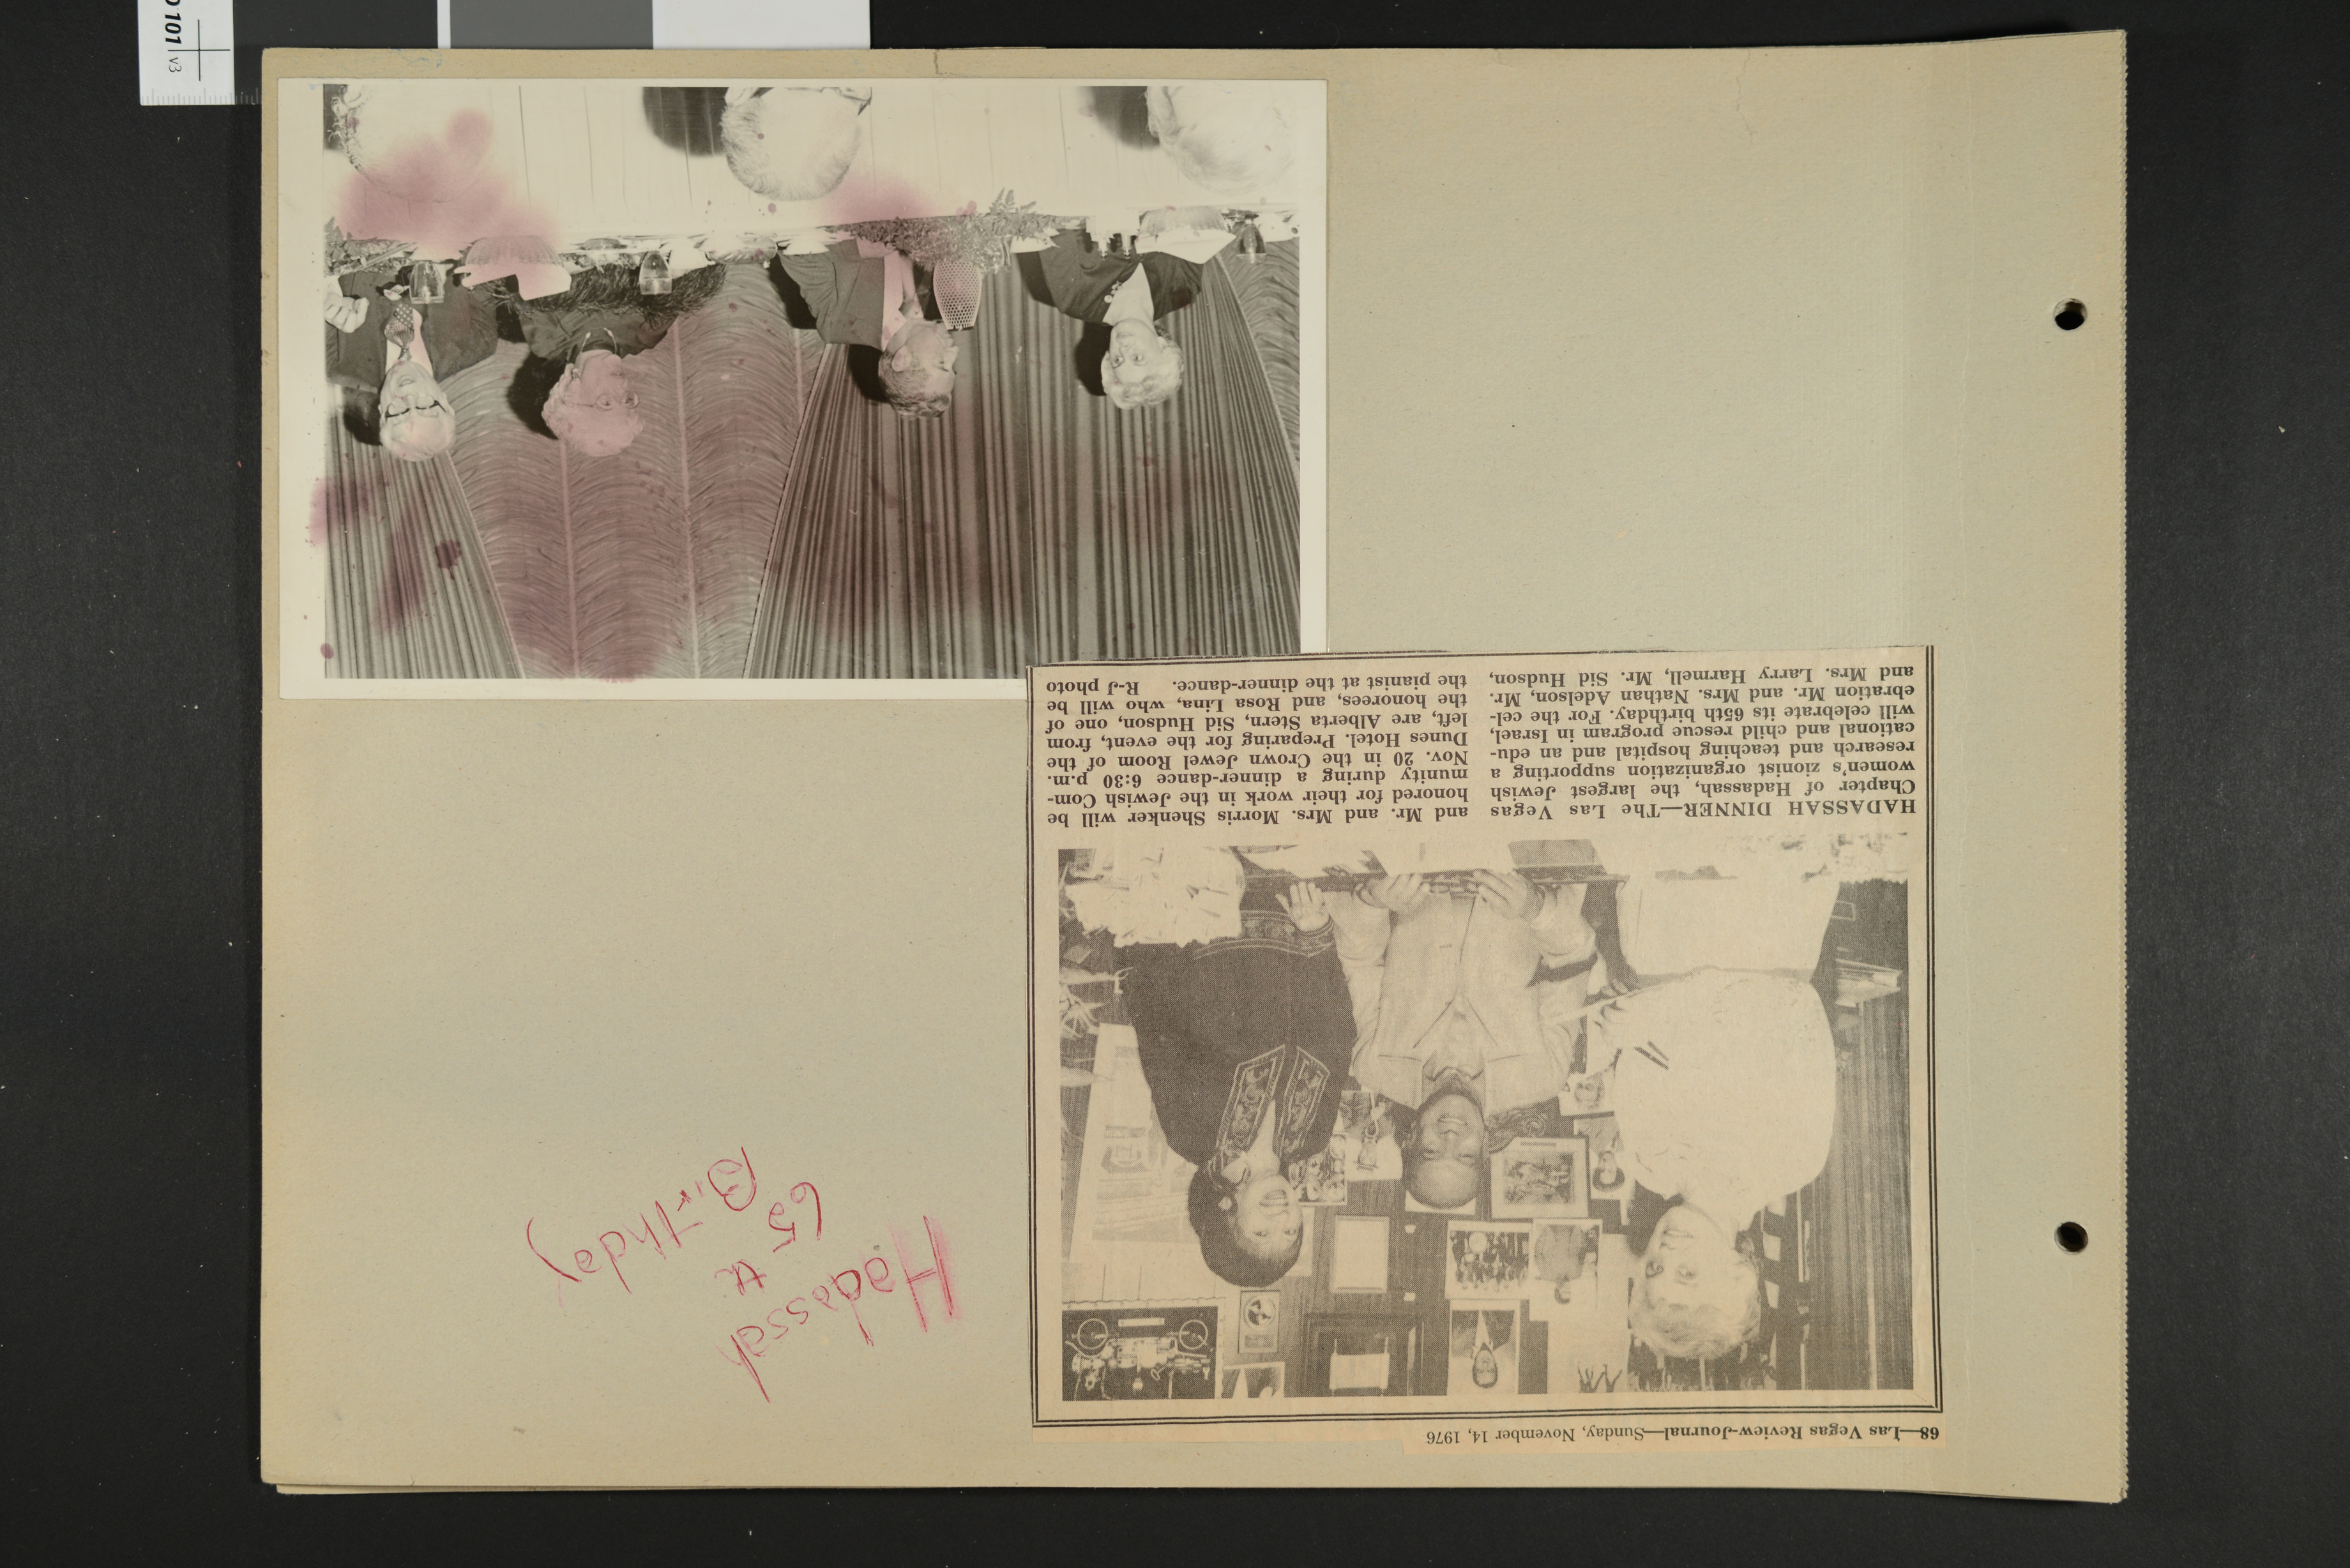 Clipping and photograph for Hadassah's 65th birthday